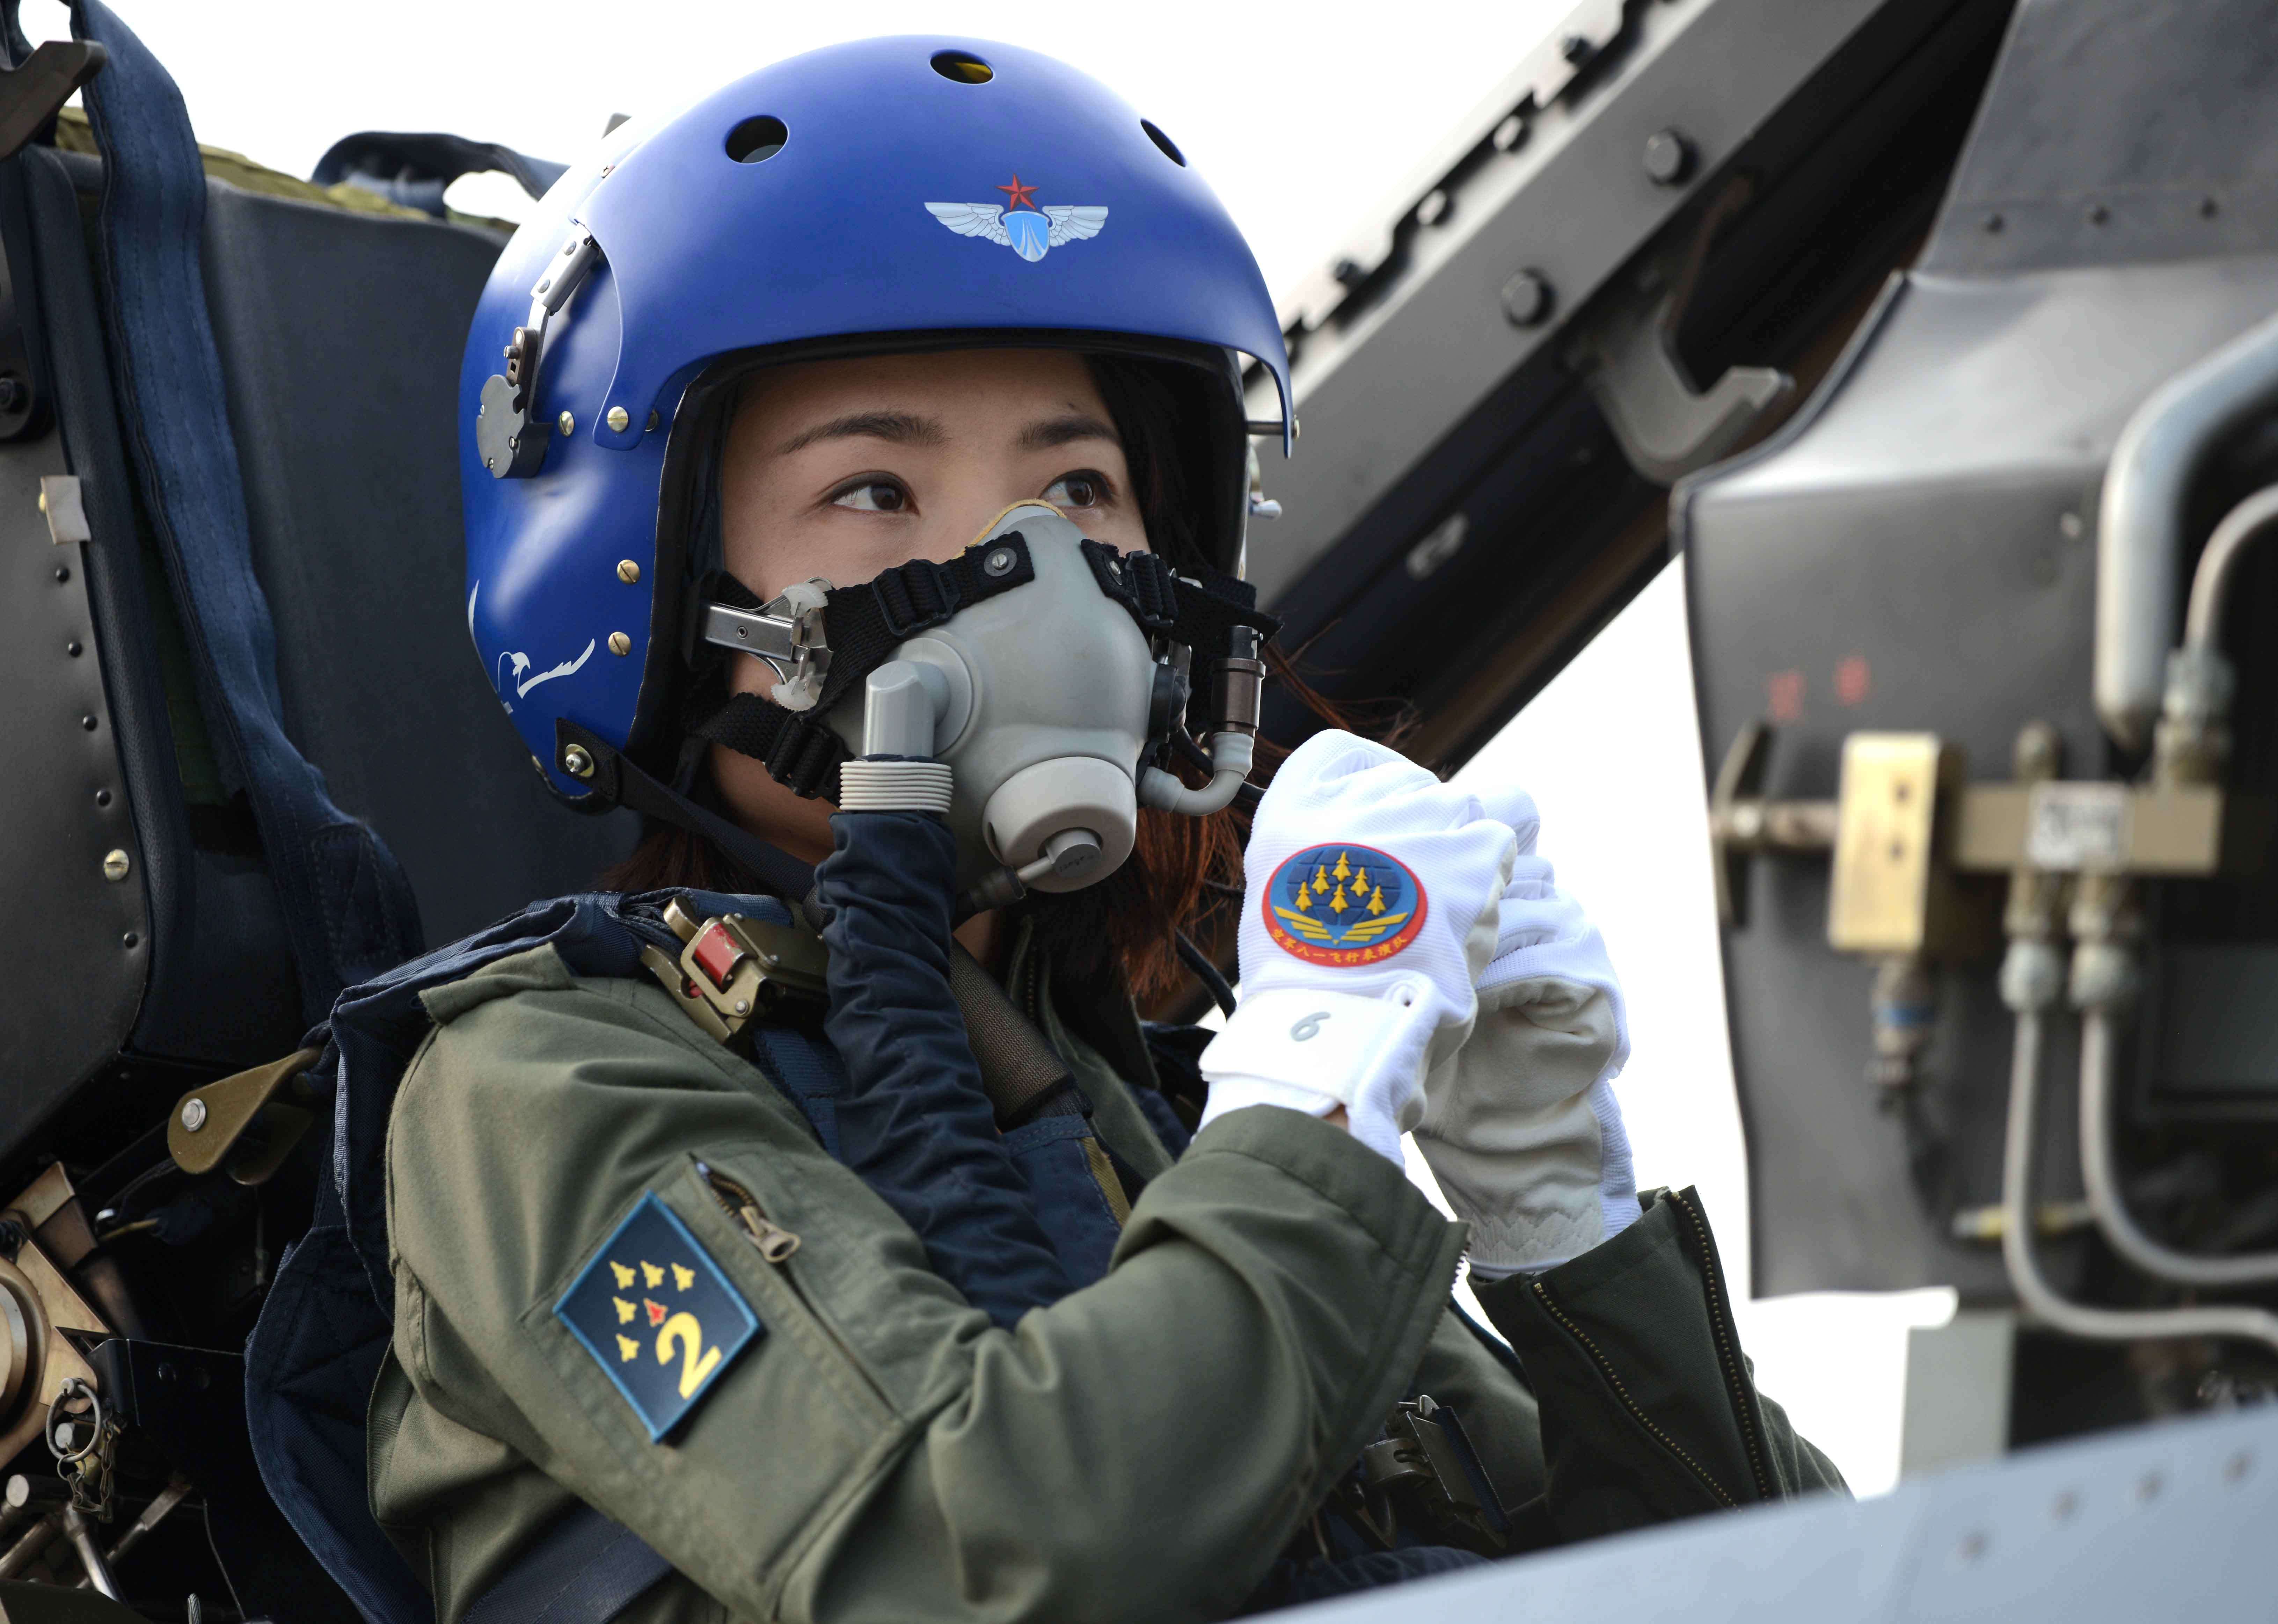 J-10 fighter pilot Yu Xu died in an accident during a routine training flight on Saturday. Photo: Xinhua